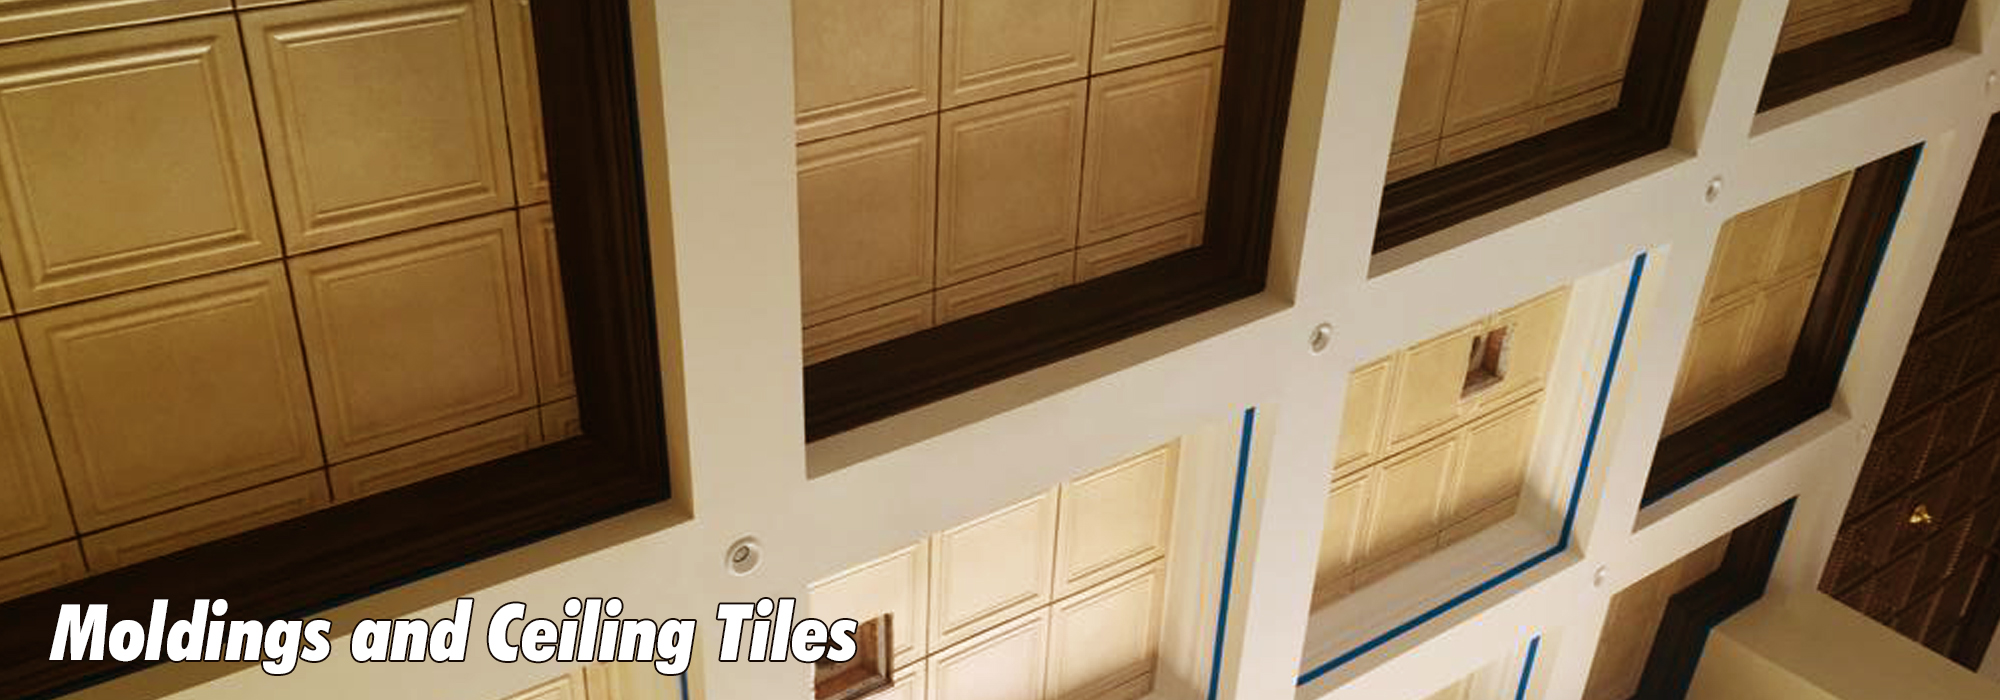 Moldings and Ceiling Tiles